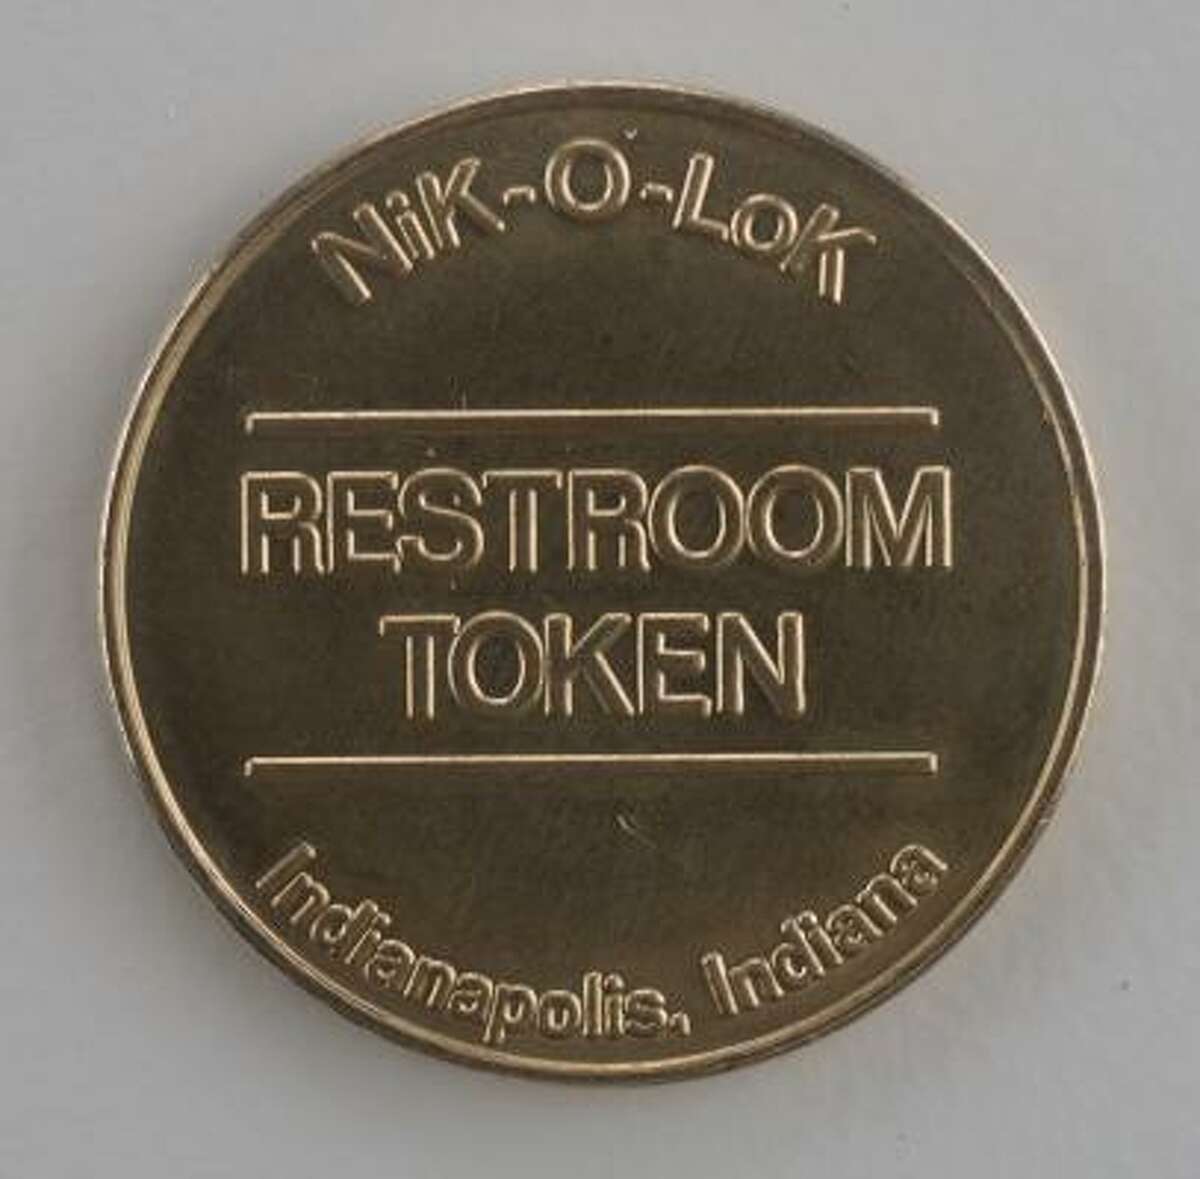 Customers at a Burger King in the Texas Medical Center must request a token or use a coin to open the restrooms.